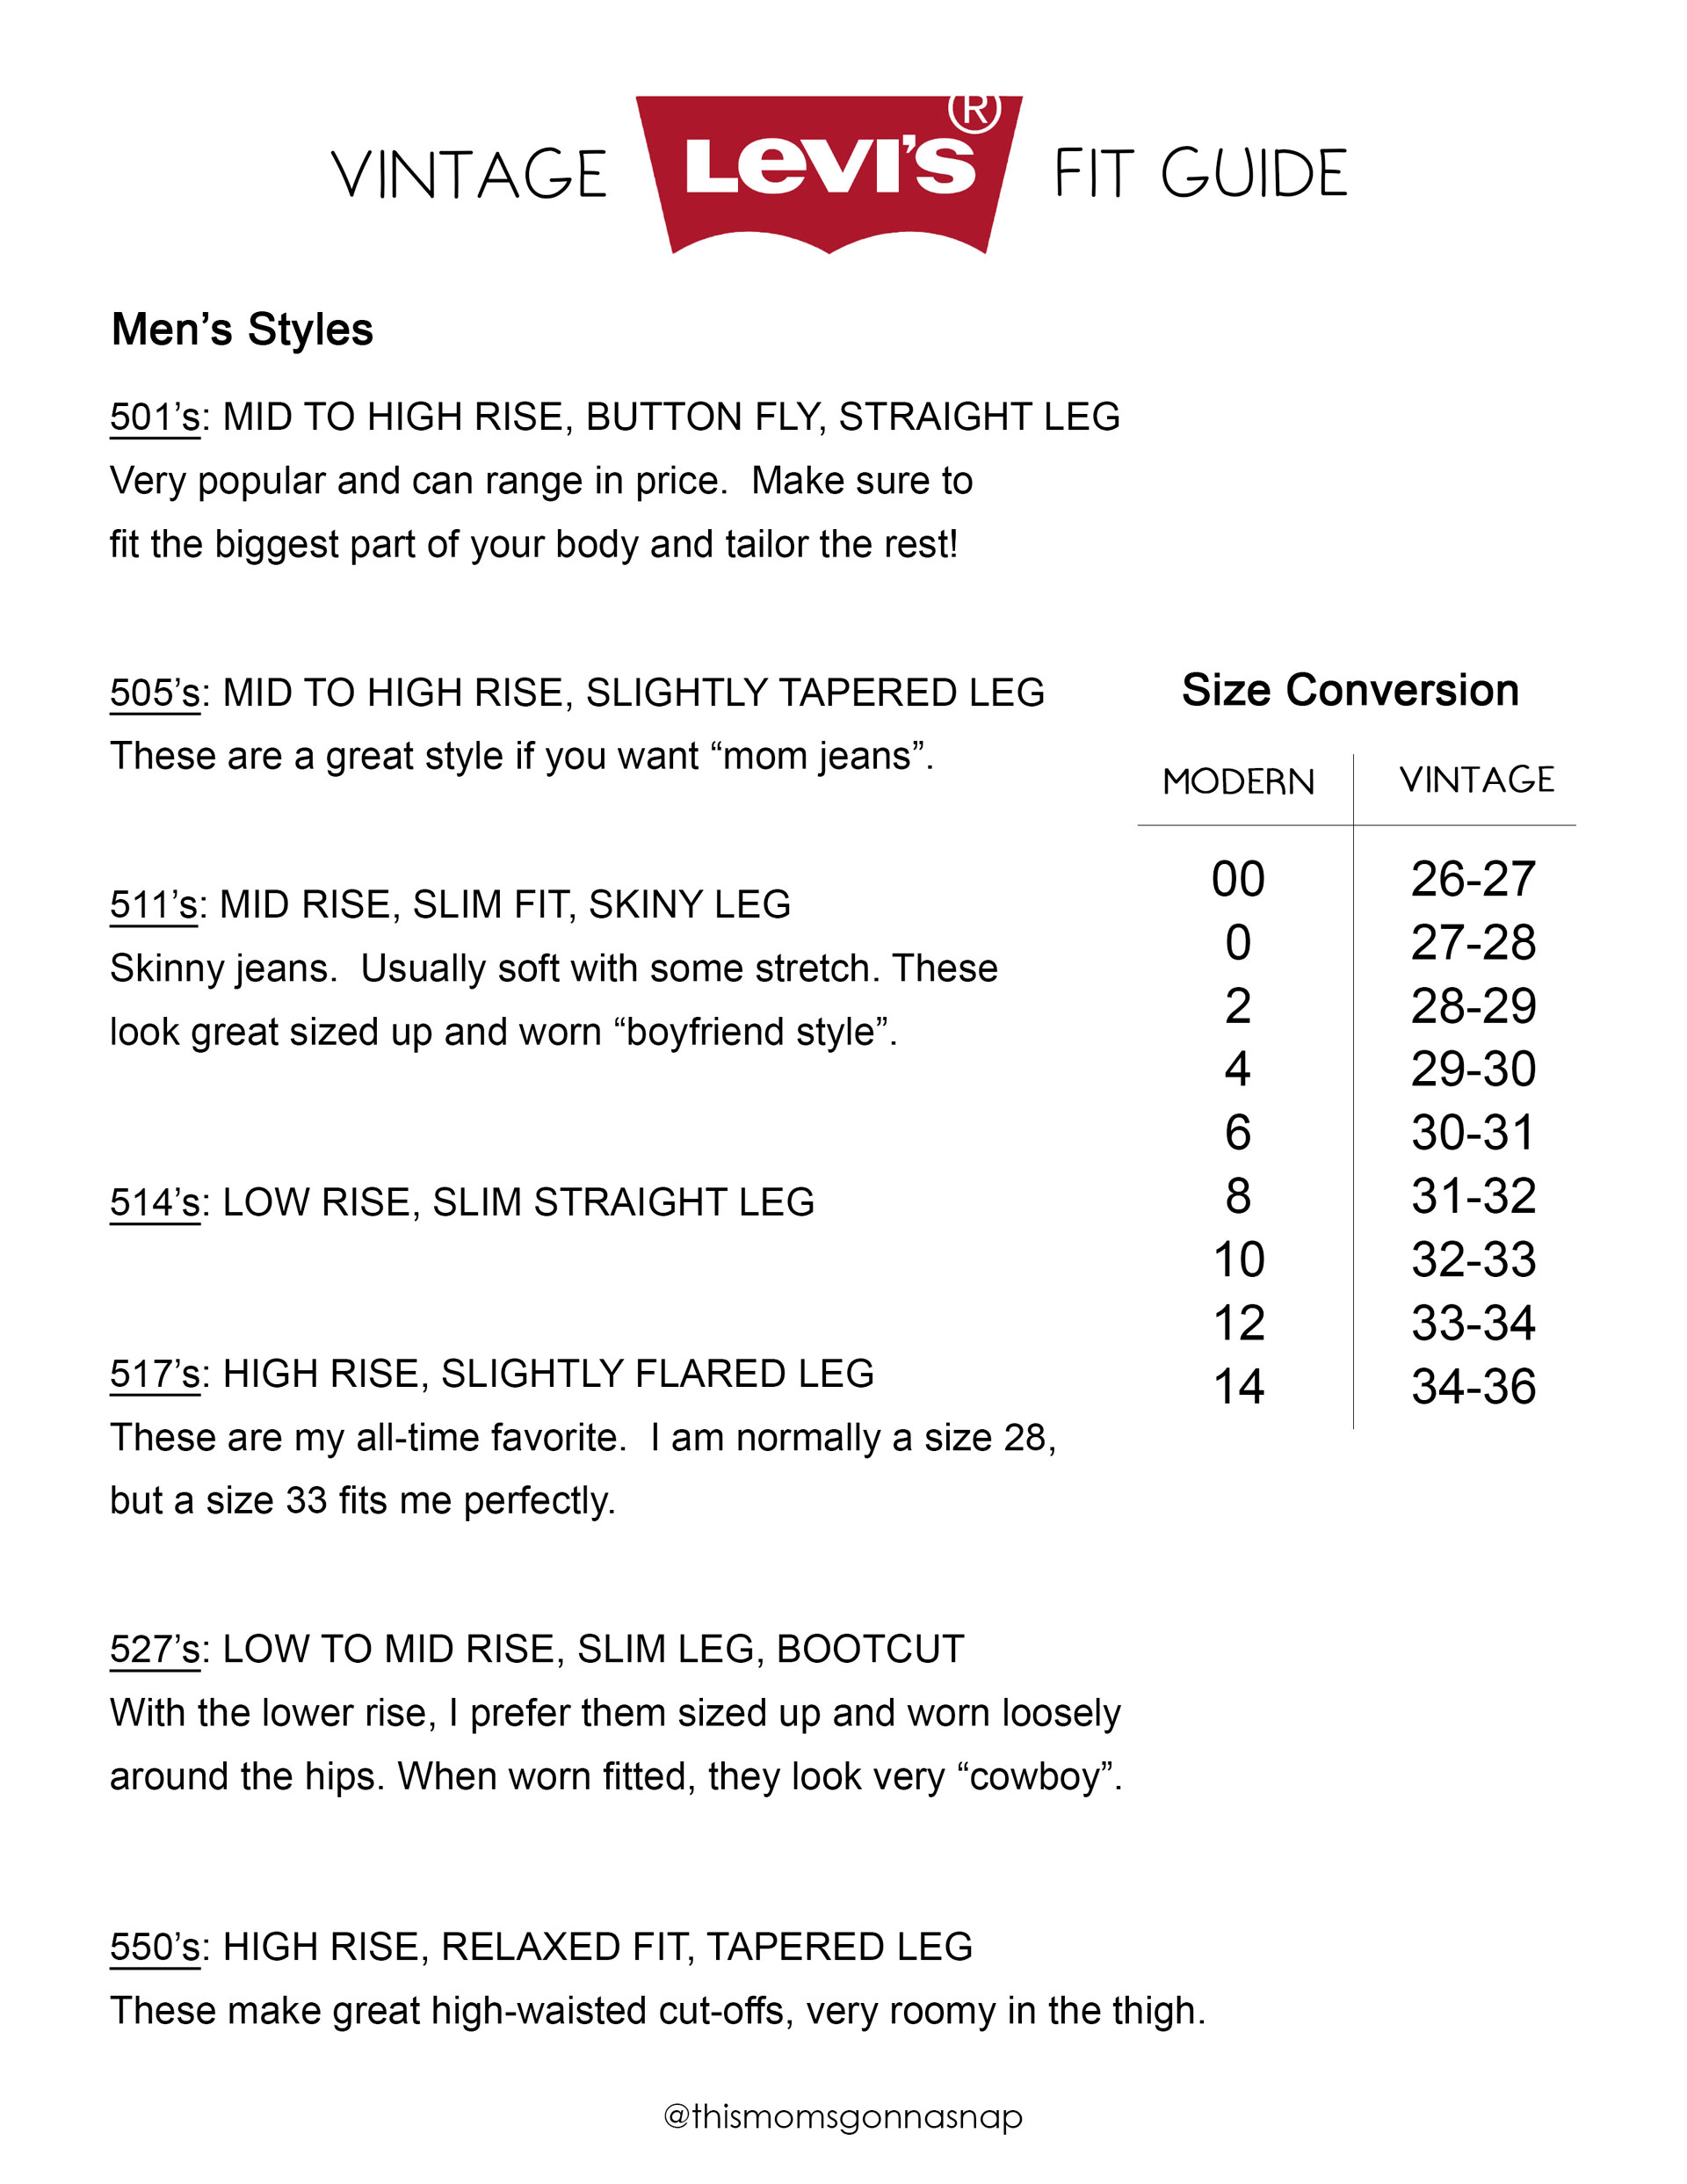 levi's fit guide printable